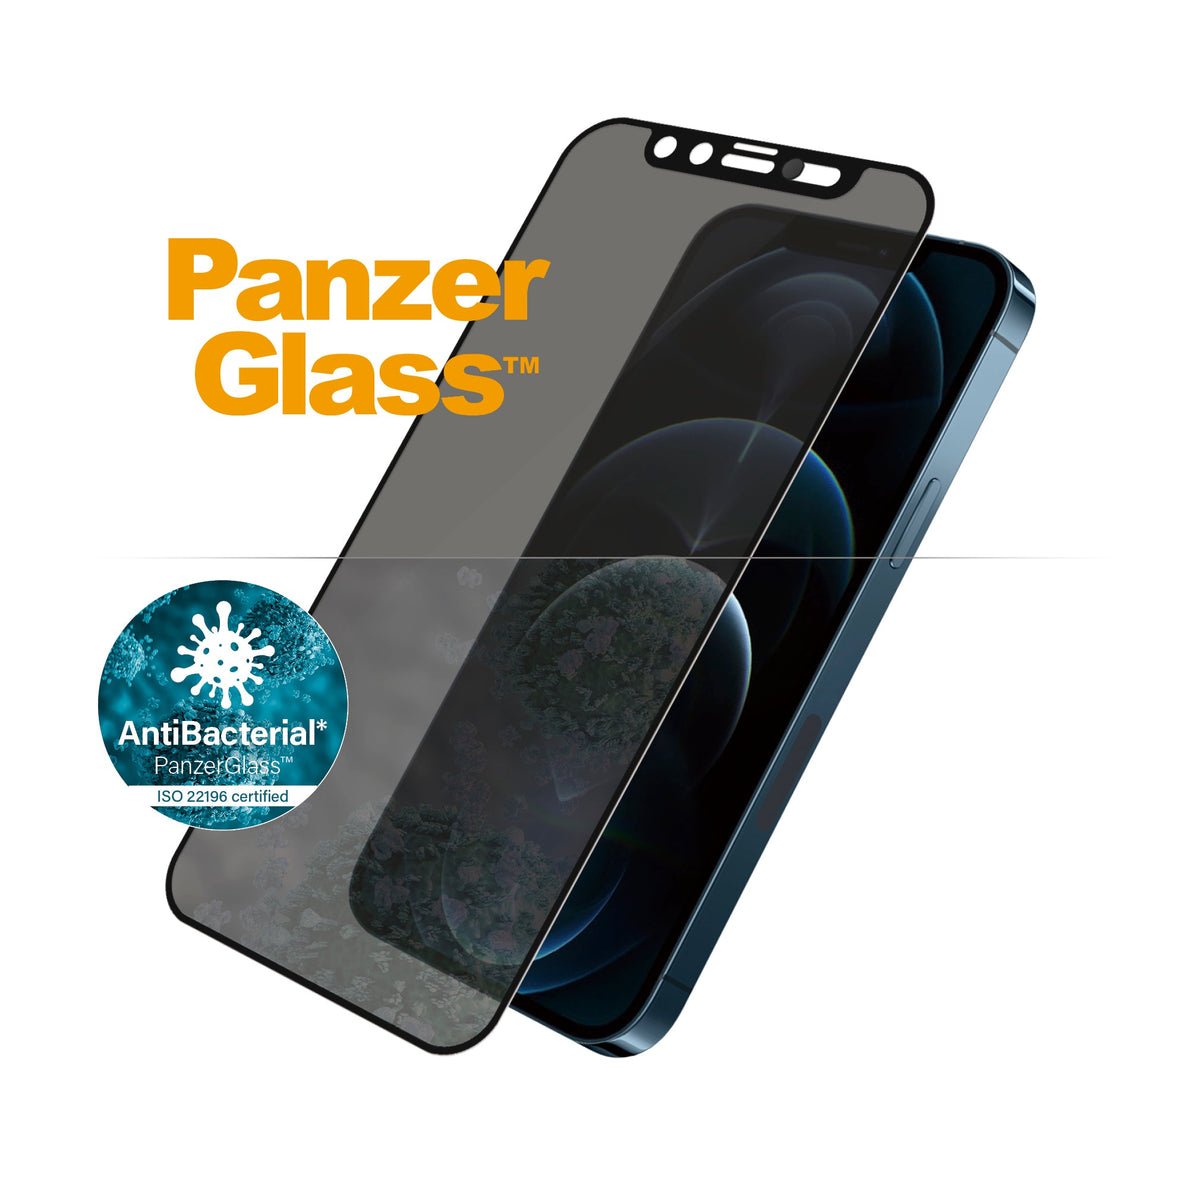 [OPEN BOX] PANZERGLASS iPhone 12 Pro Max - Cam Slider Black Frame w/ Anti-Microbial Screen Protector - Privacy